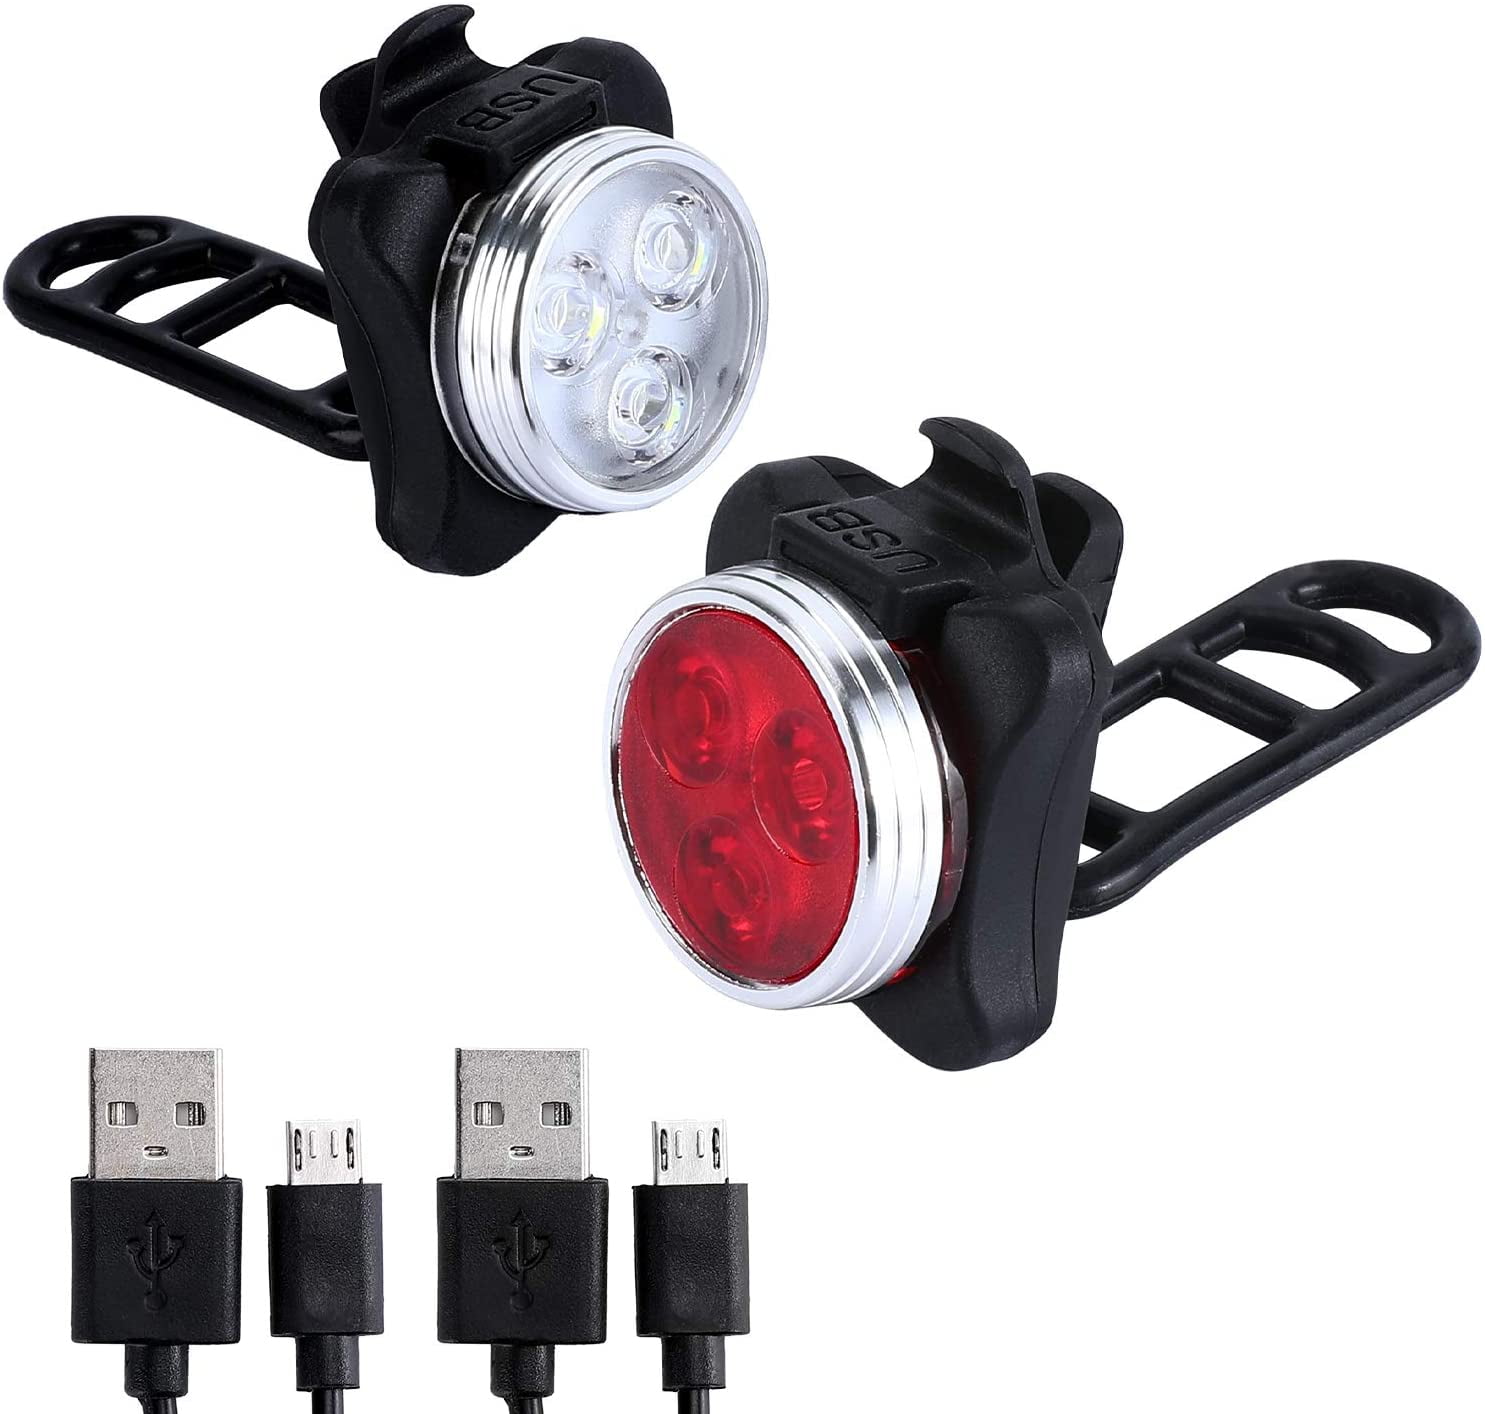 USB Rechargeable LED Waterproof Bike Bicycle Lamp Front Back Rear Tail light